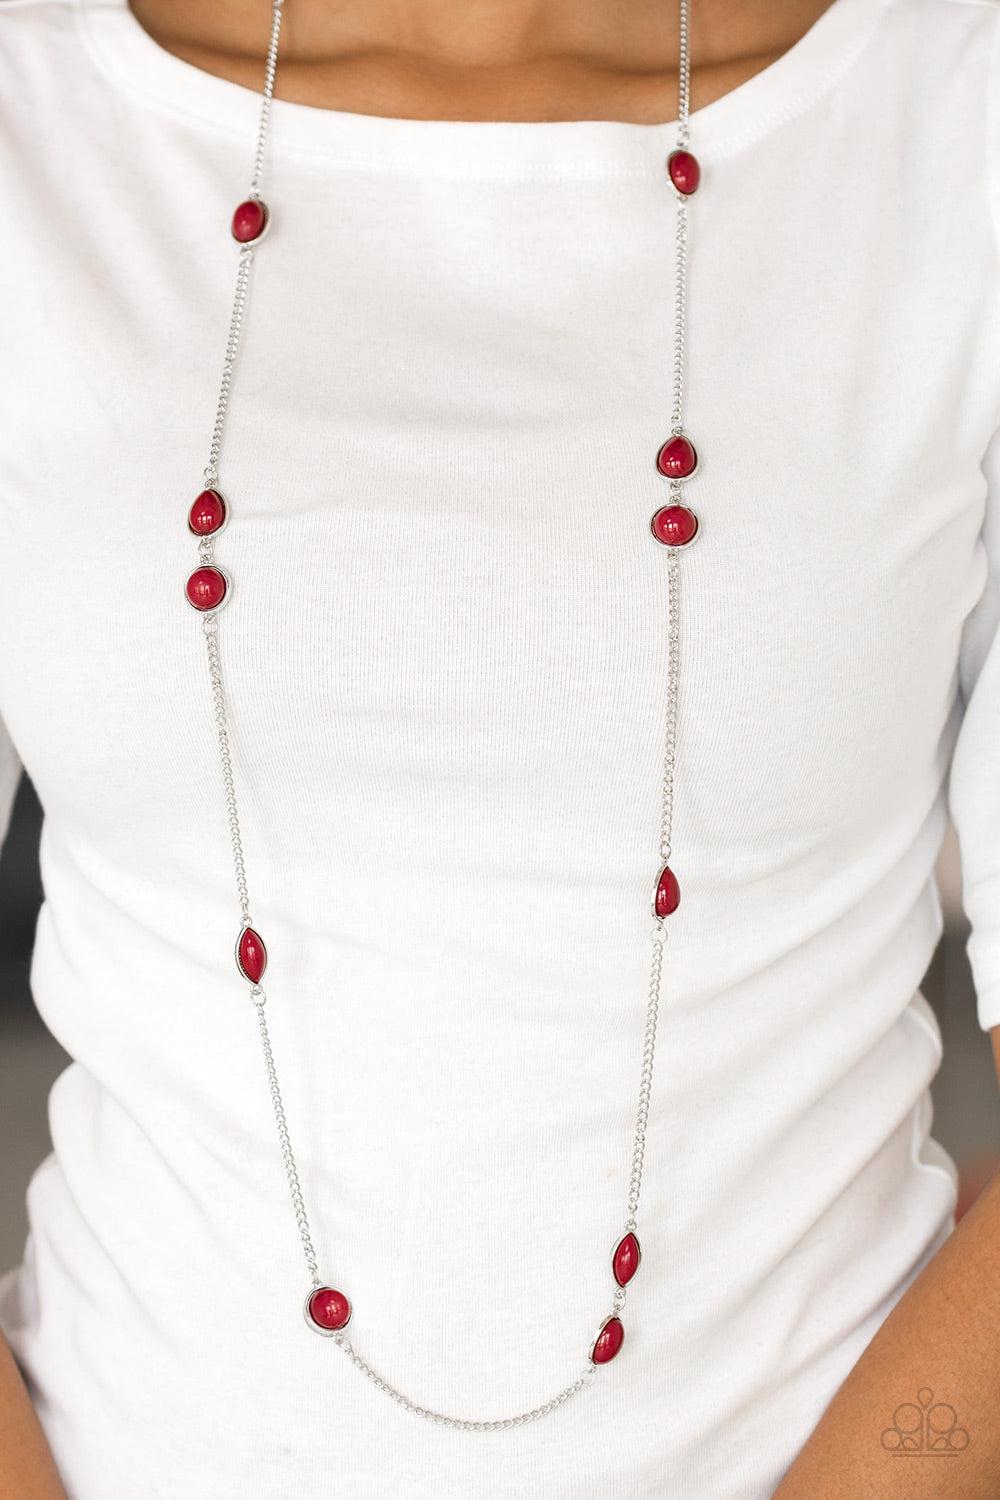 Pacific Piers Red Necklace - Paparazzi Accessories-on model - CarasShop.com - $5 Jewelry by Cara Jewels